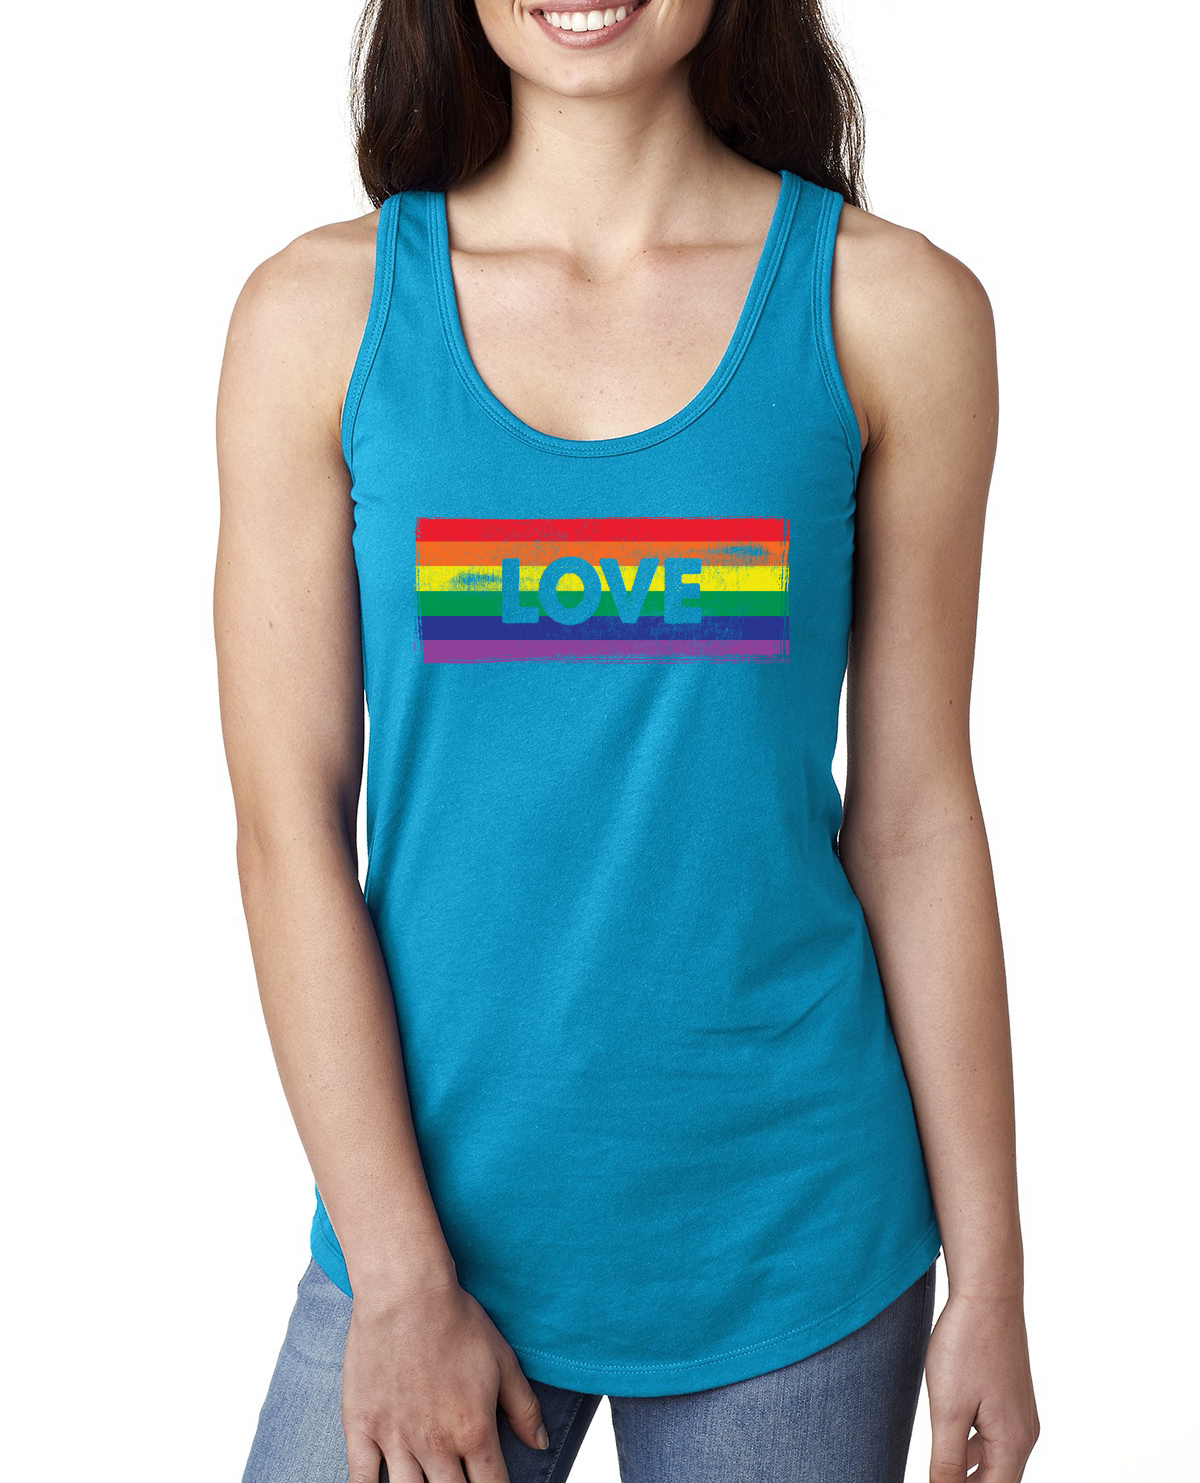 Lesbow Rainbow Flag Lesbian Rights & Equality LGBT Racerback Tank Top Gay Pride